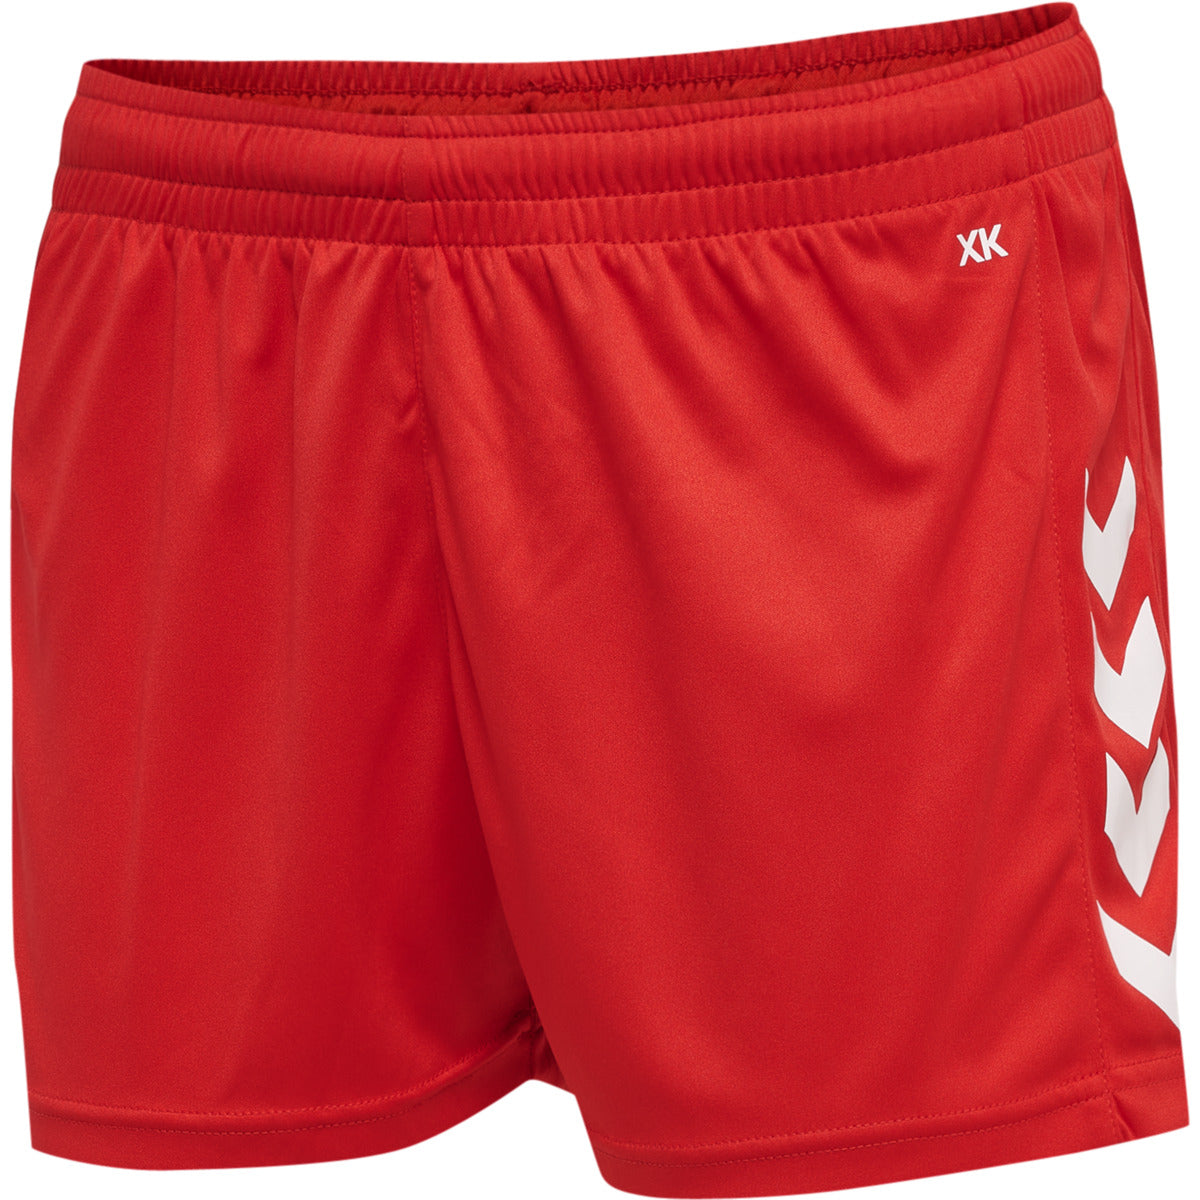 hmlCORE XK POLY SHORTS WOMAN TRUE RED